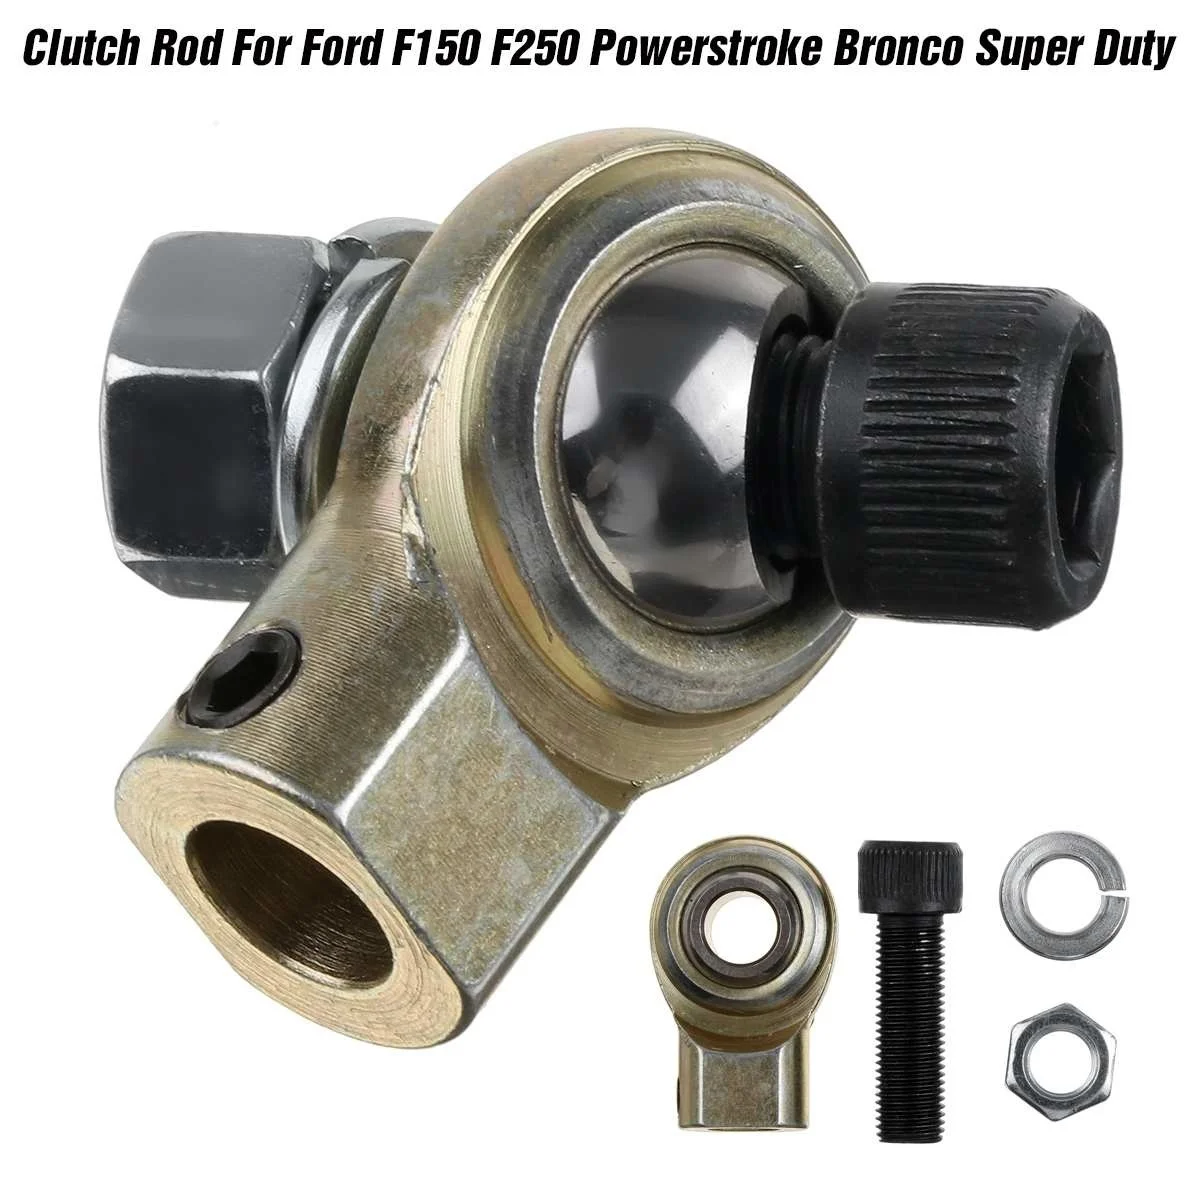 

For Ford Clutch Rod Permanent Fix Repair Heim Joint F150 F250 Powerstroke Bronco Super Duty 1987-1998 1999-2010